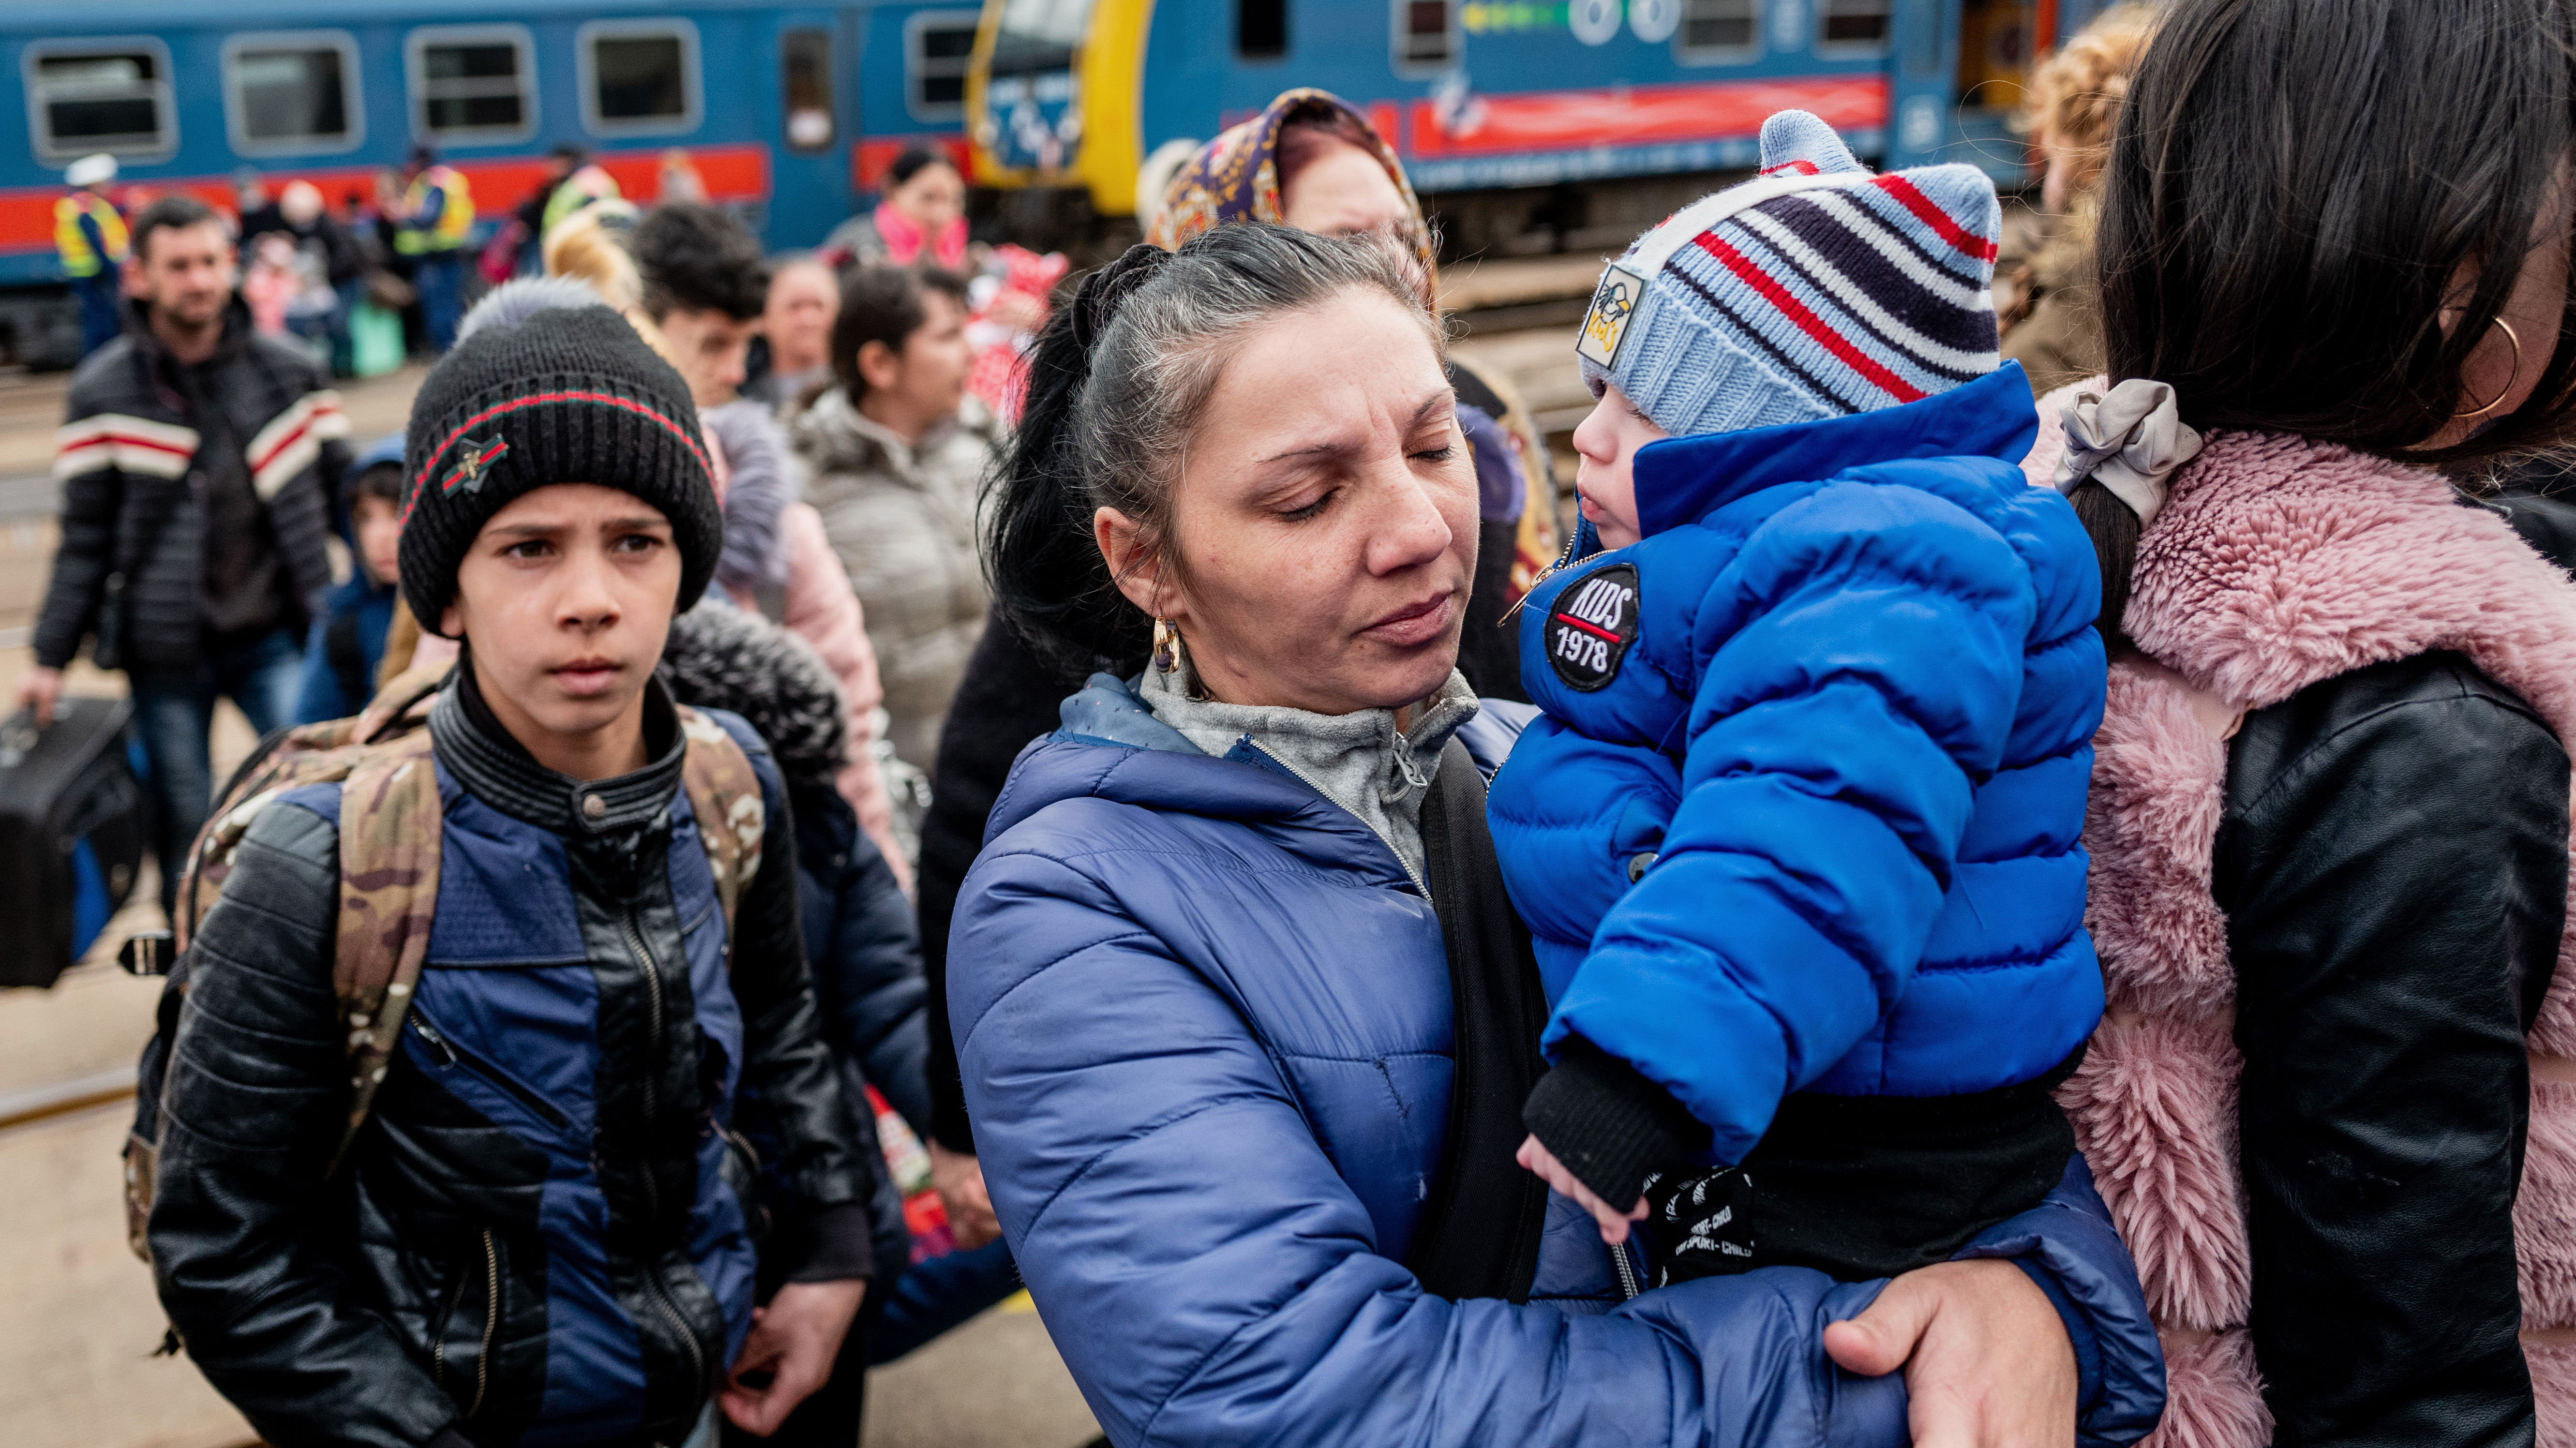 People arrive at the train station after crossing the border at Zahony-Csap in Zahony, Hungary. 